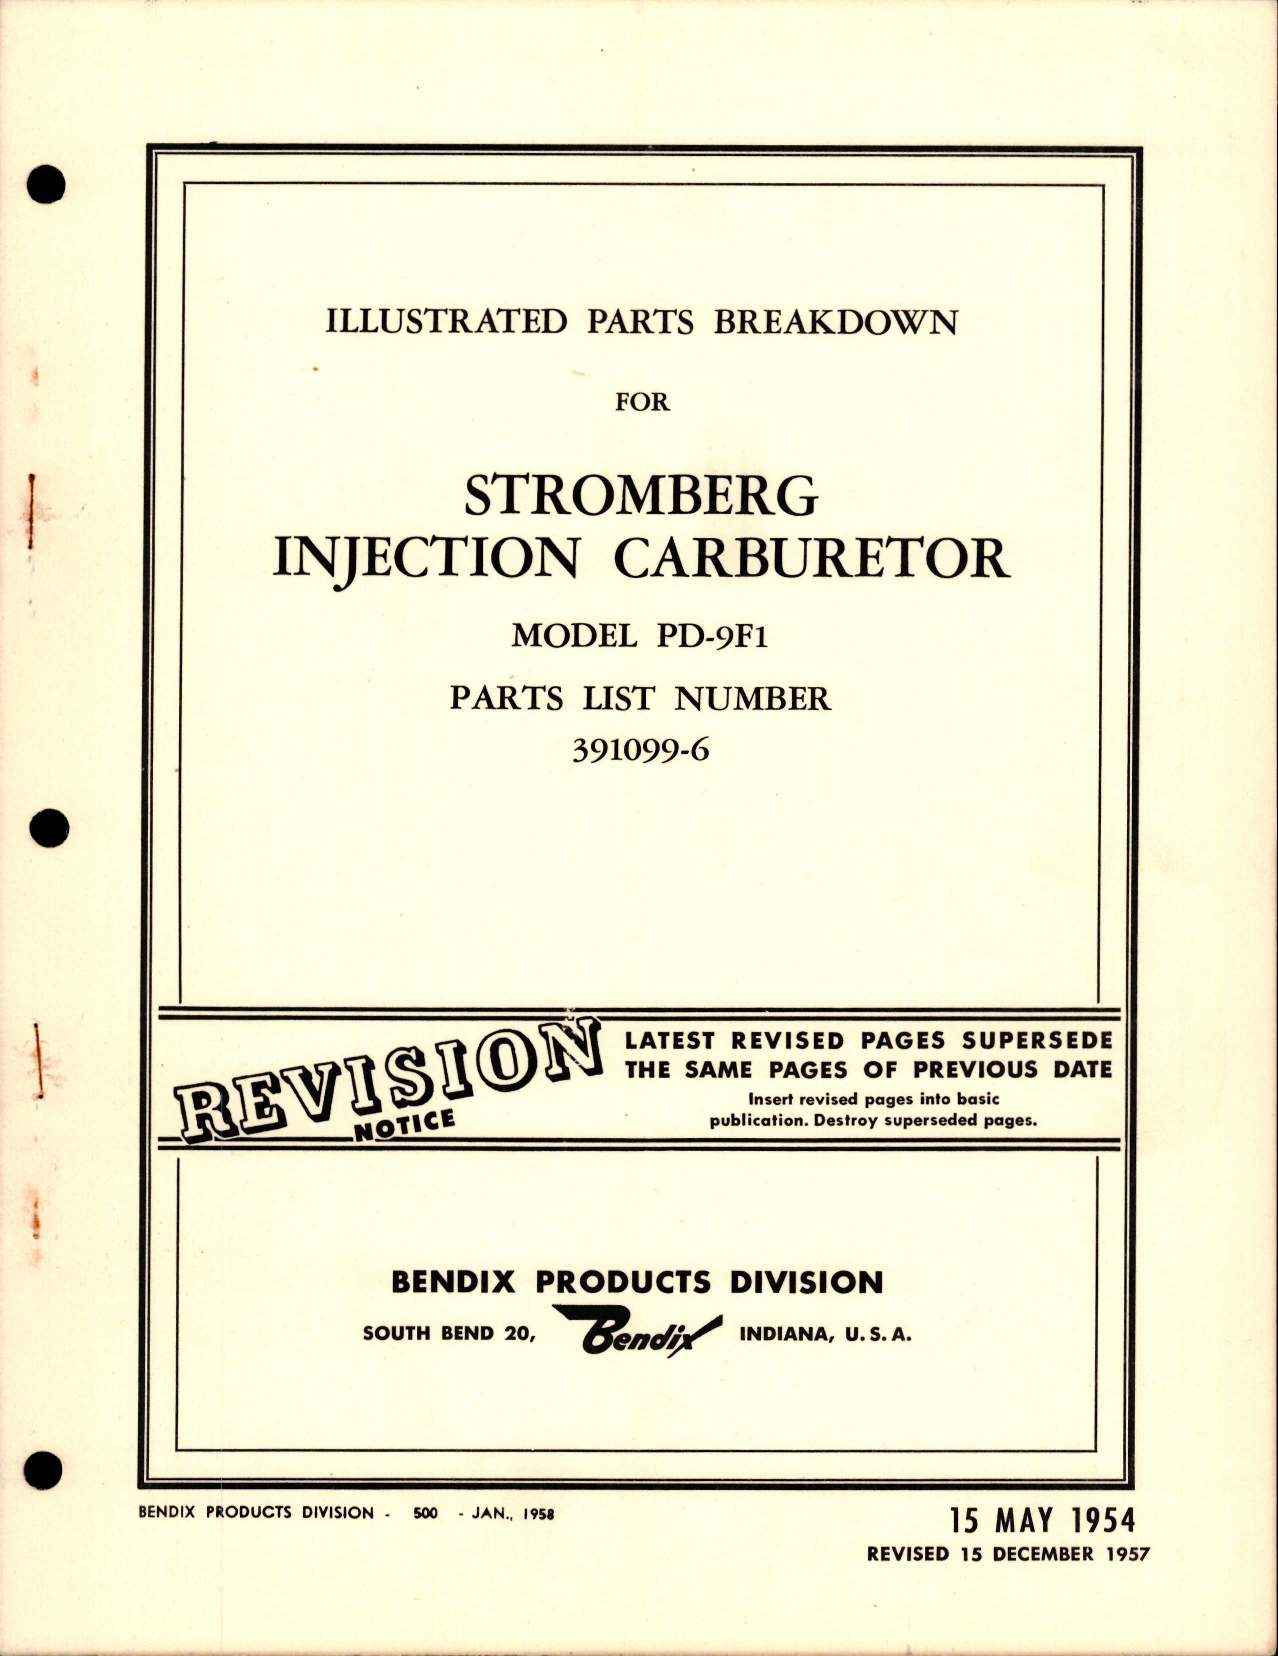 Sample page 1 from AirCorps Library document: Illustrated Parts Breakdown for Stromberg Injection Carburetor Model PD-9F1